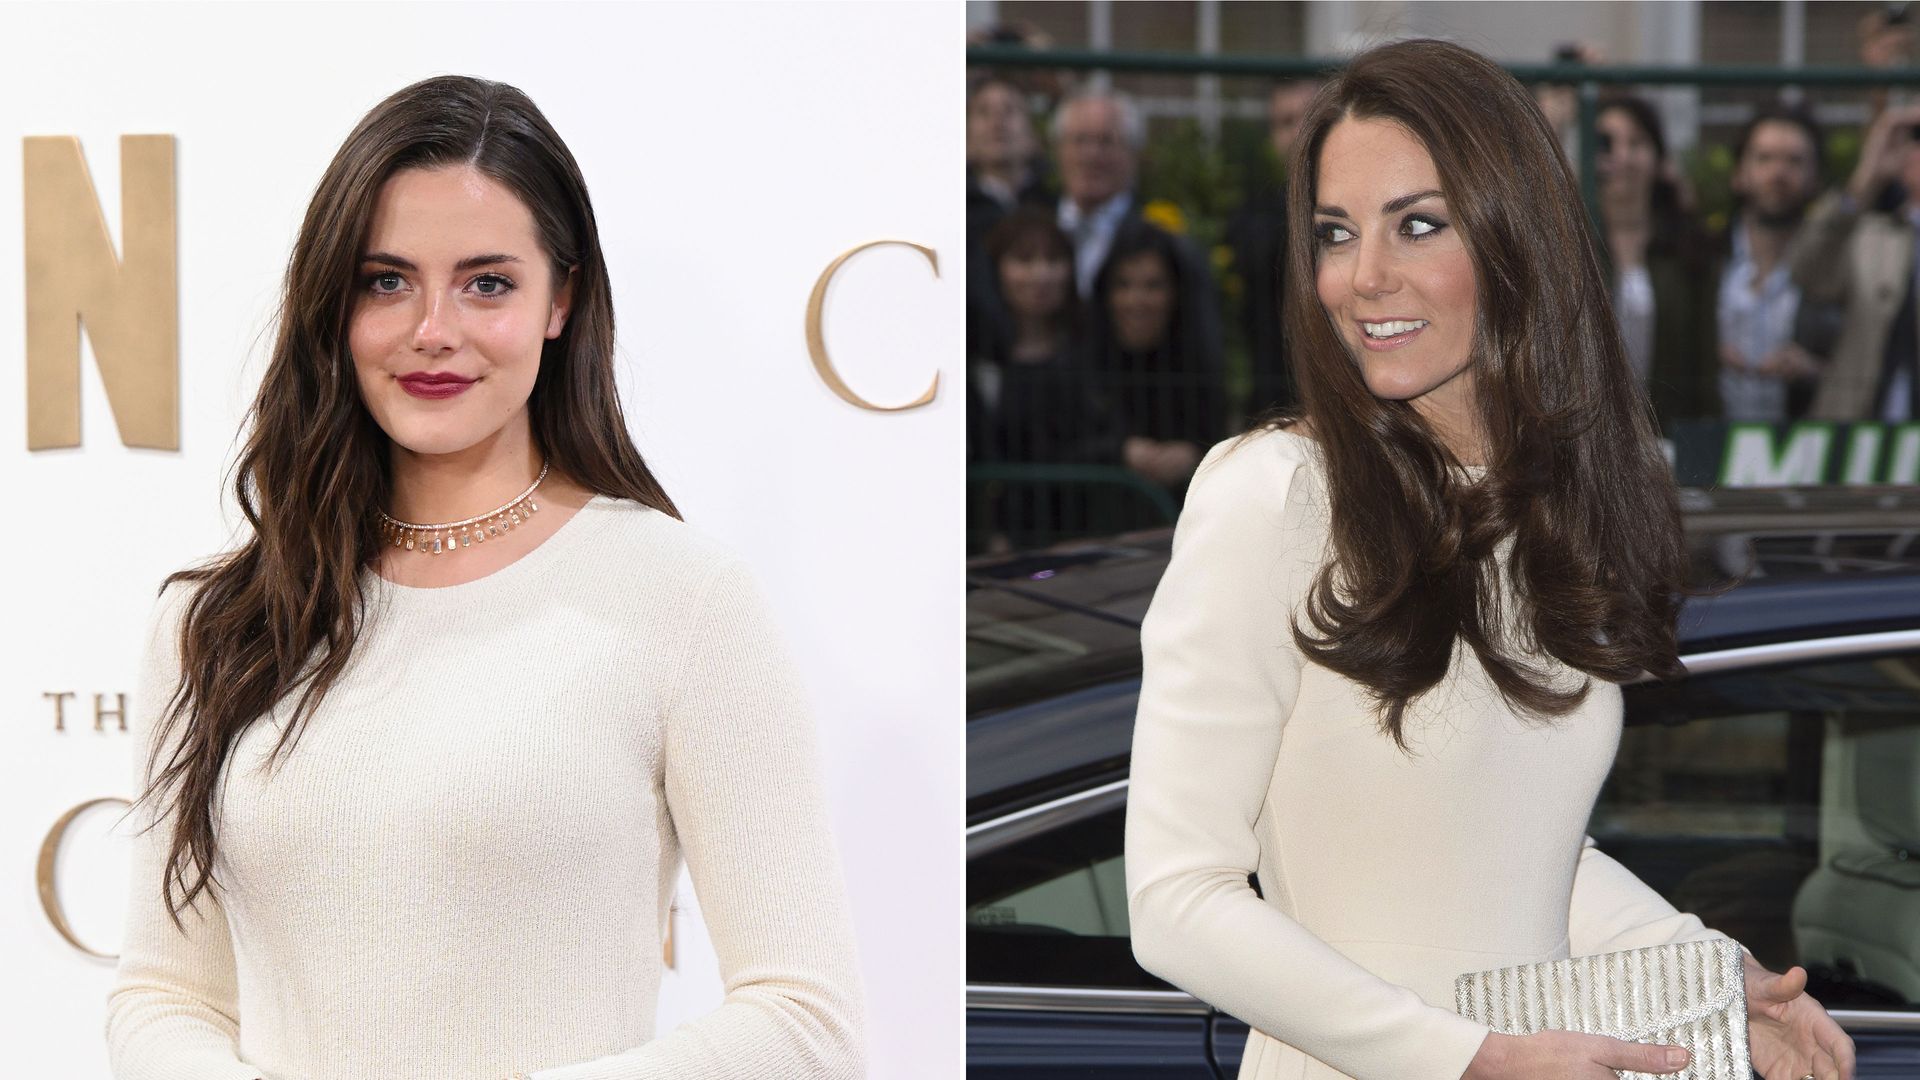 The Crown's Meg Bellamy and Kate Middleton wearing identical dresses